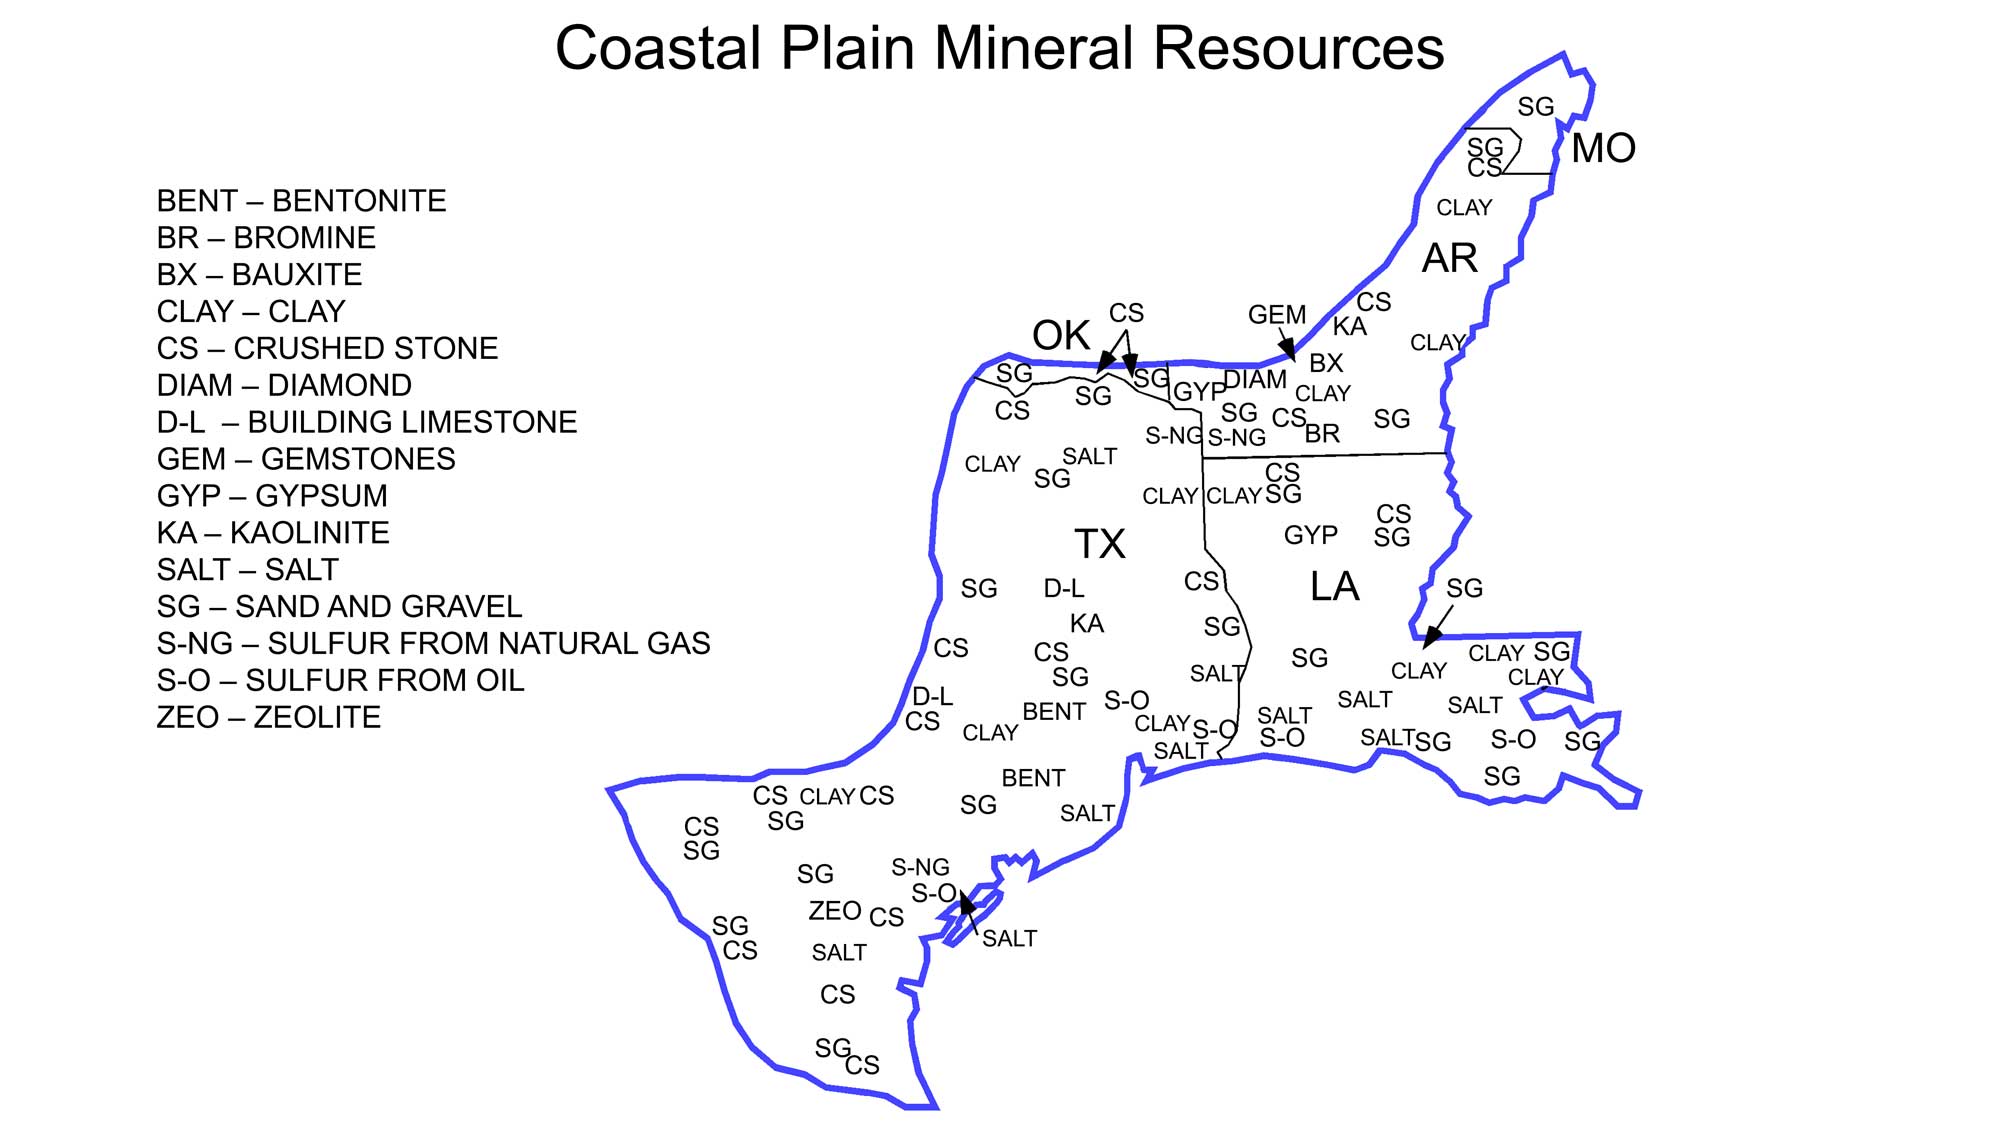 Map showing the locations of different types of mineral resources in the Coastal Plain region of the South-Central United States.